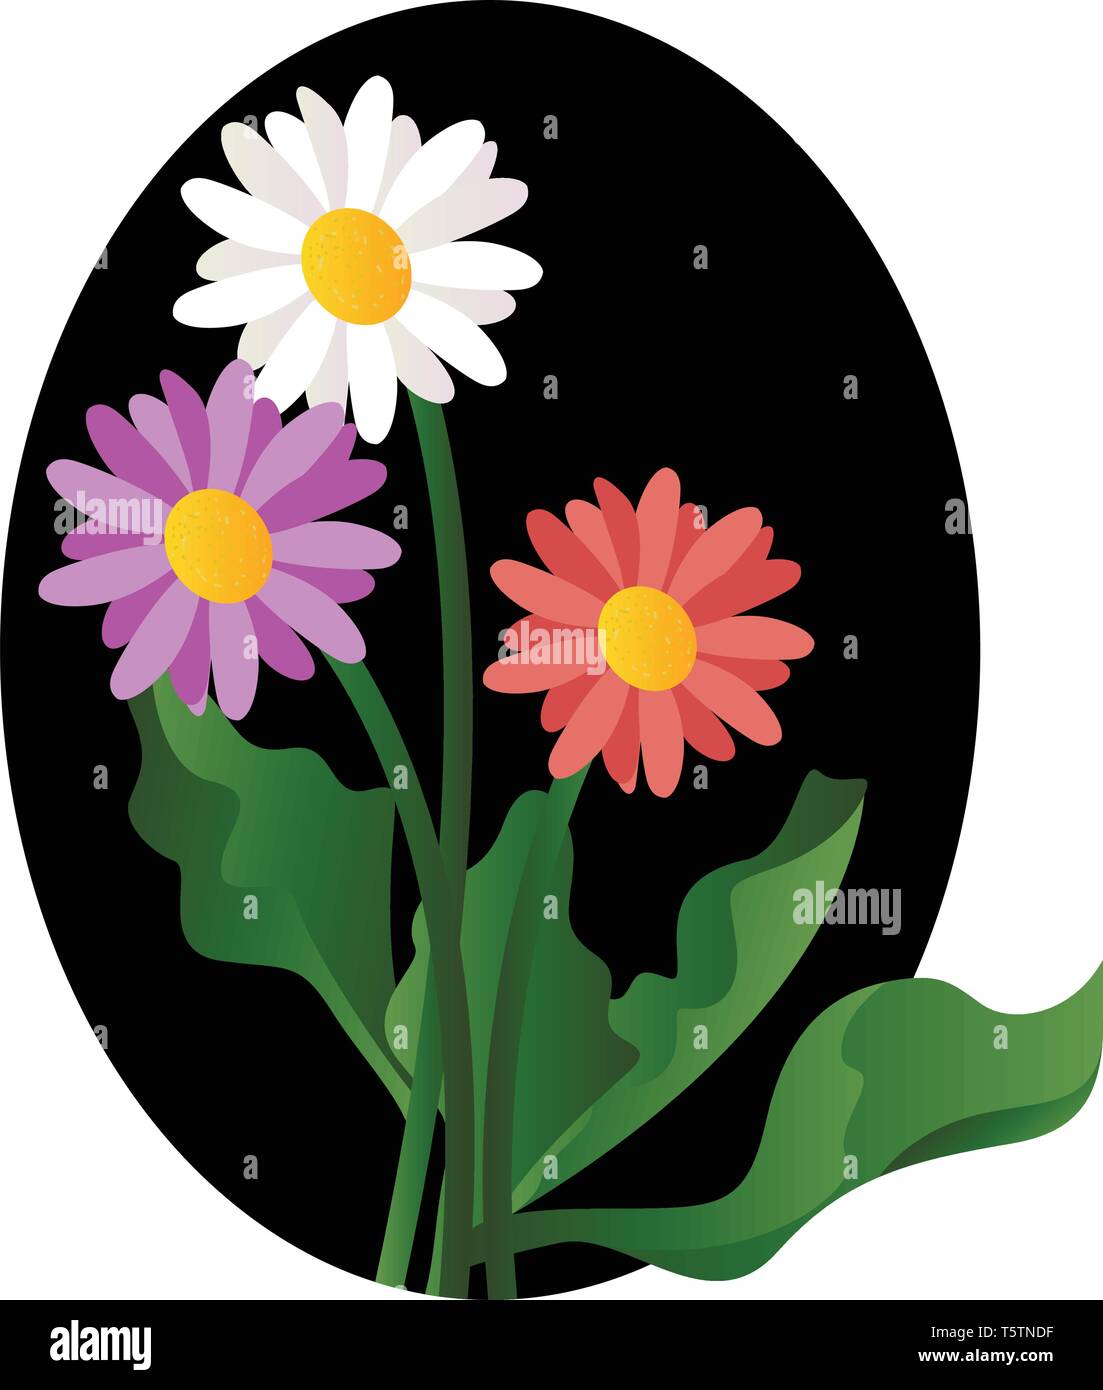 Vector illustration of violet white and pink daisy flowers with green leafs on white background. Stock Vector